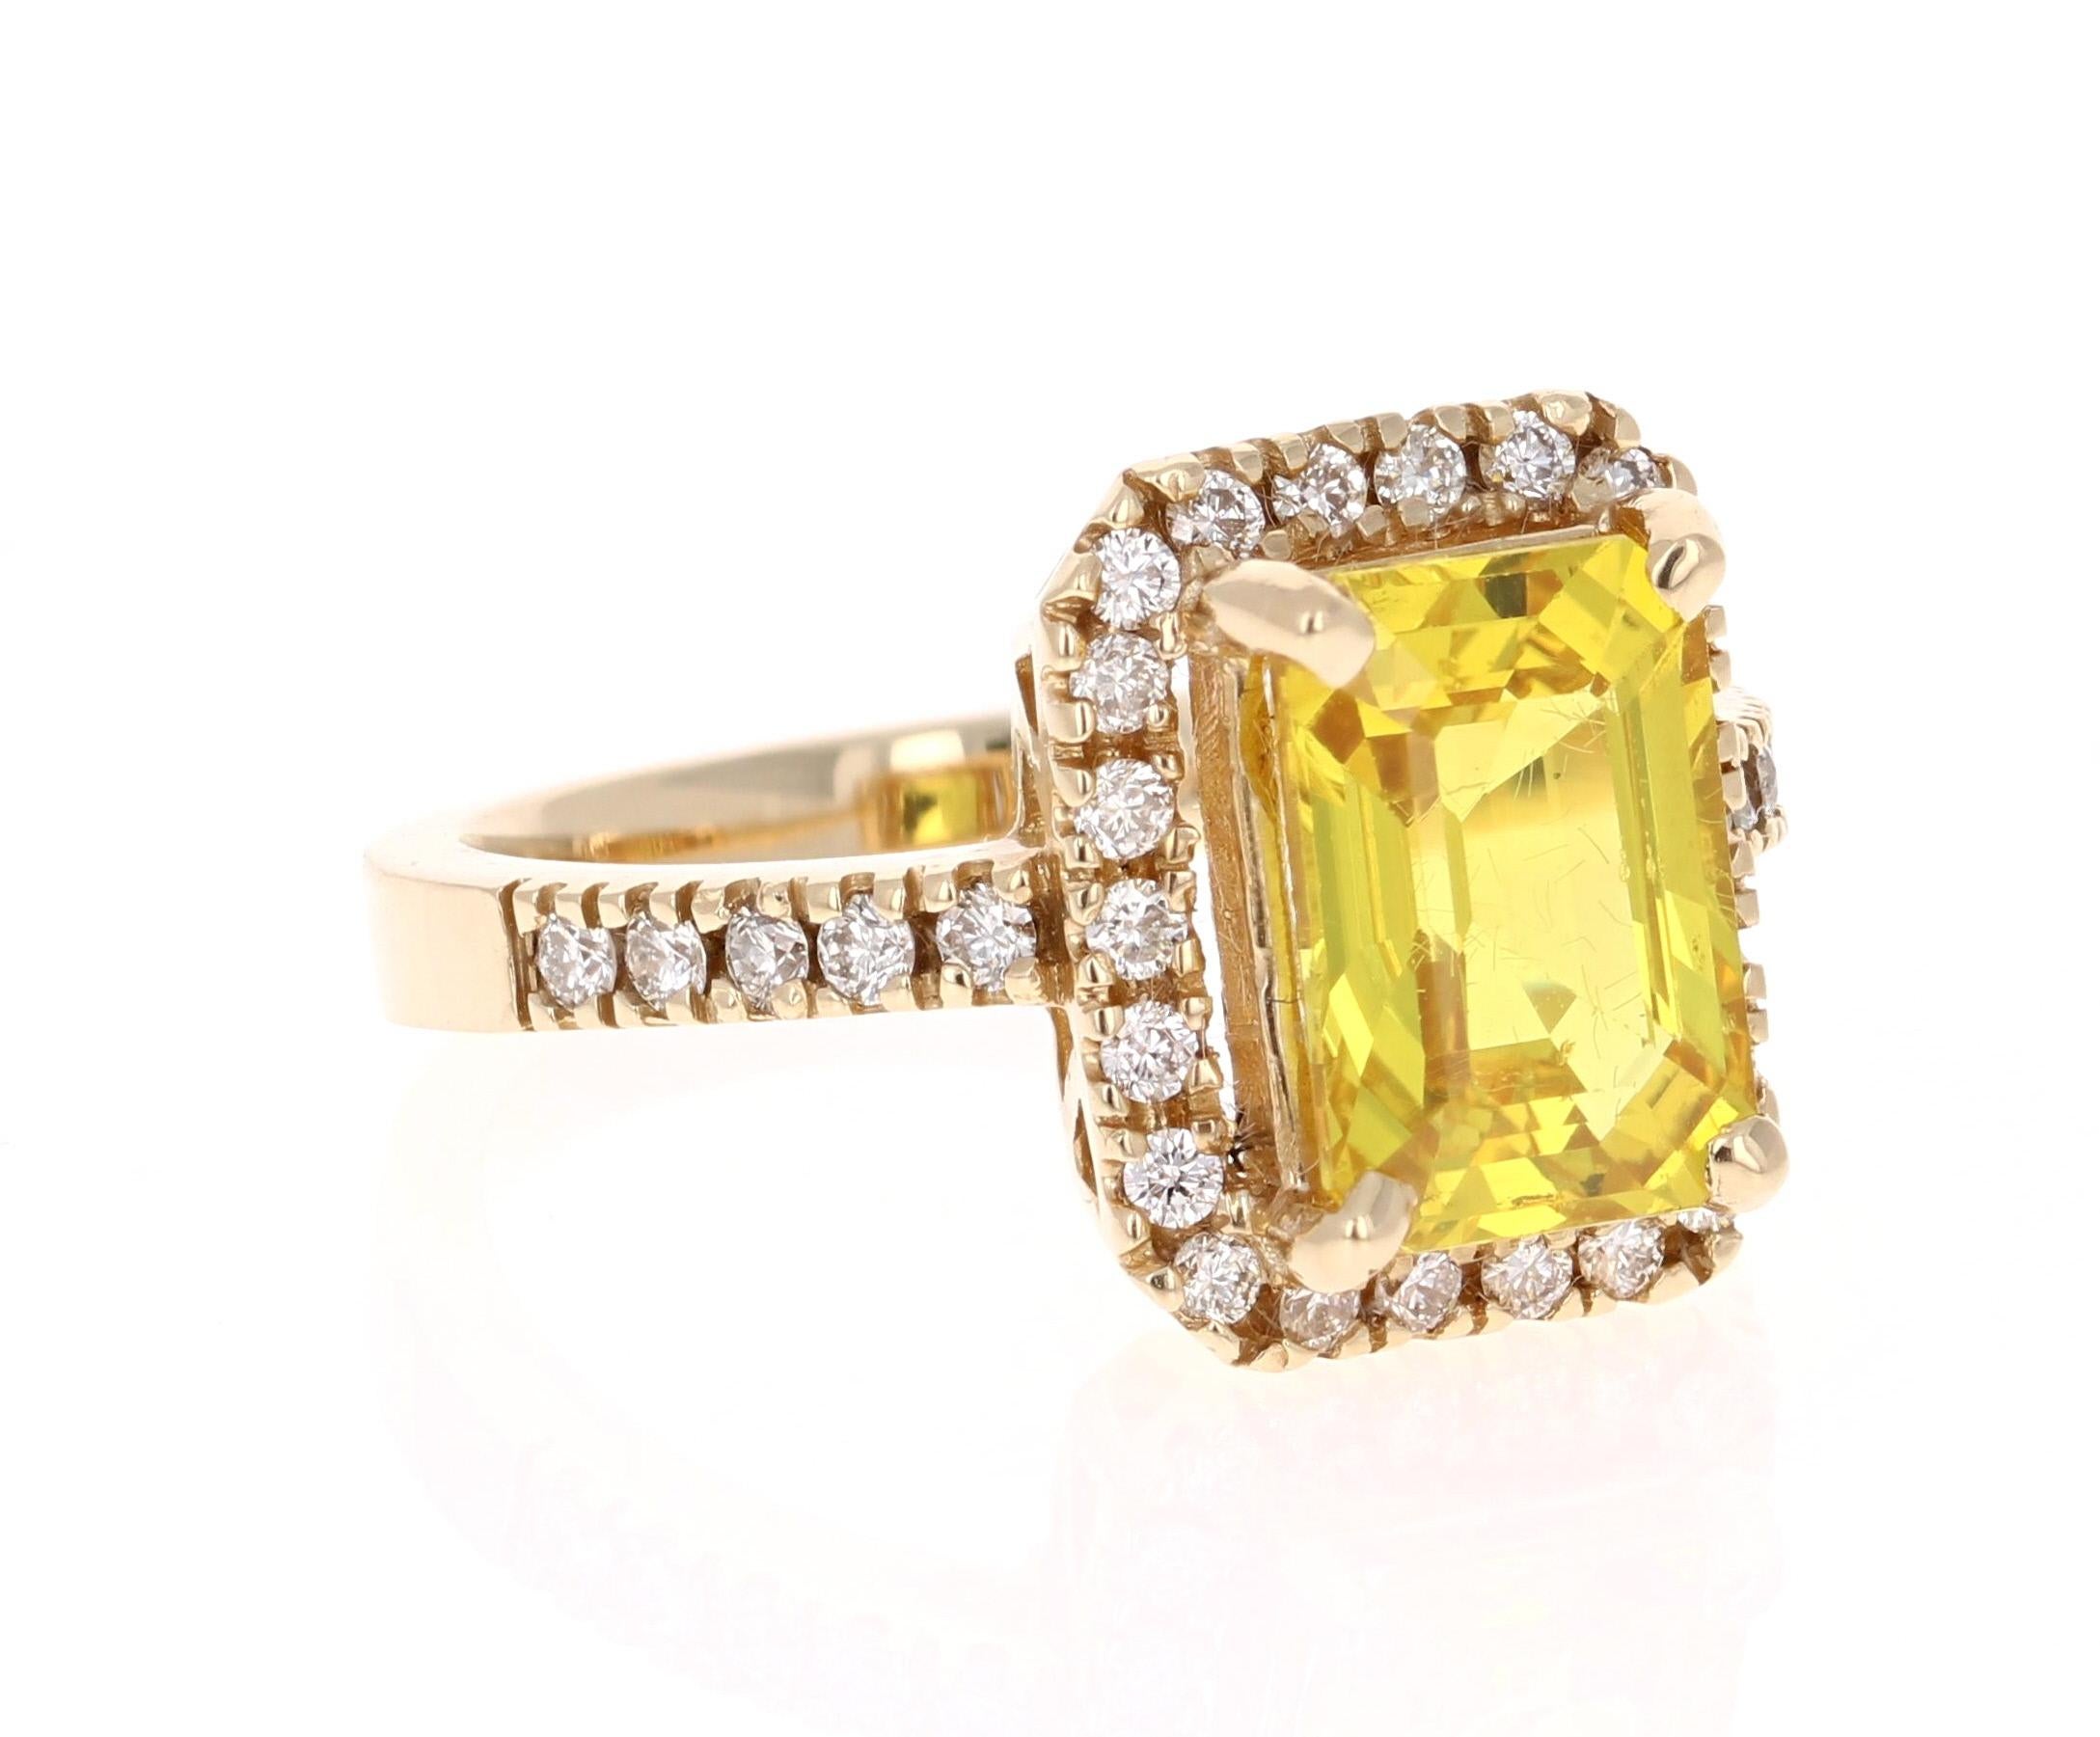 Gorgeous Yellow Sapphire and Diamond Ring that can be a Cocktail ring or a stunning Engagement ring!
This ring has a 3.73 Carat Emerald Cut Yellow Sapphire in the center of the ring and is surrounded by 32 Round Cut Diamonds that weigh 0.49 carats.